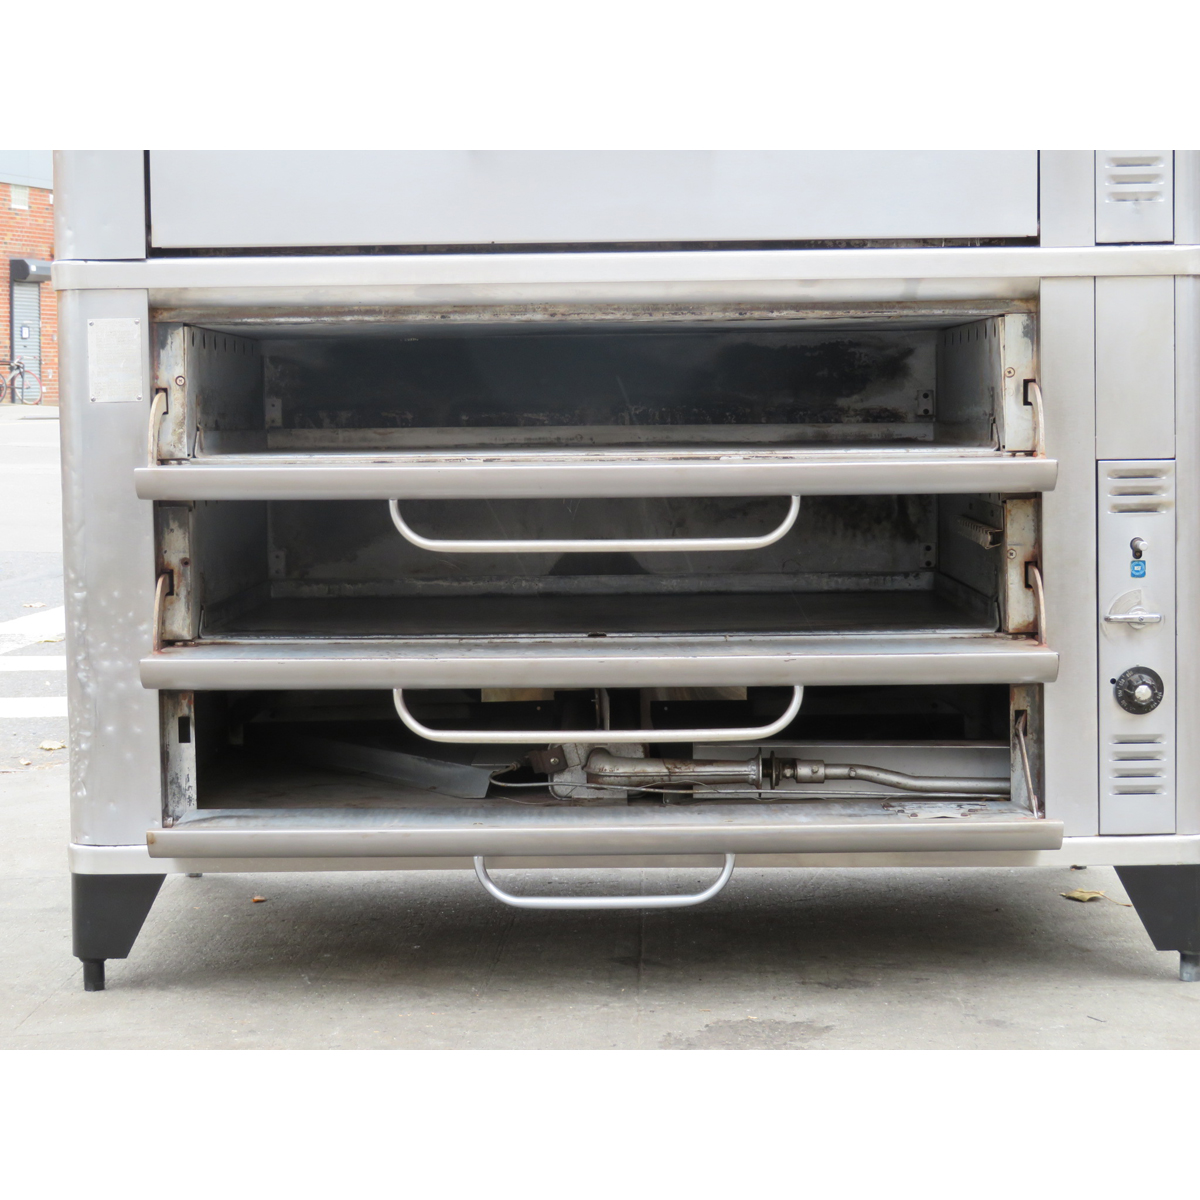 Blodgett 981/981 Double Deck Natural Gas Oven, Used Very Good Condition image 4